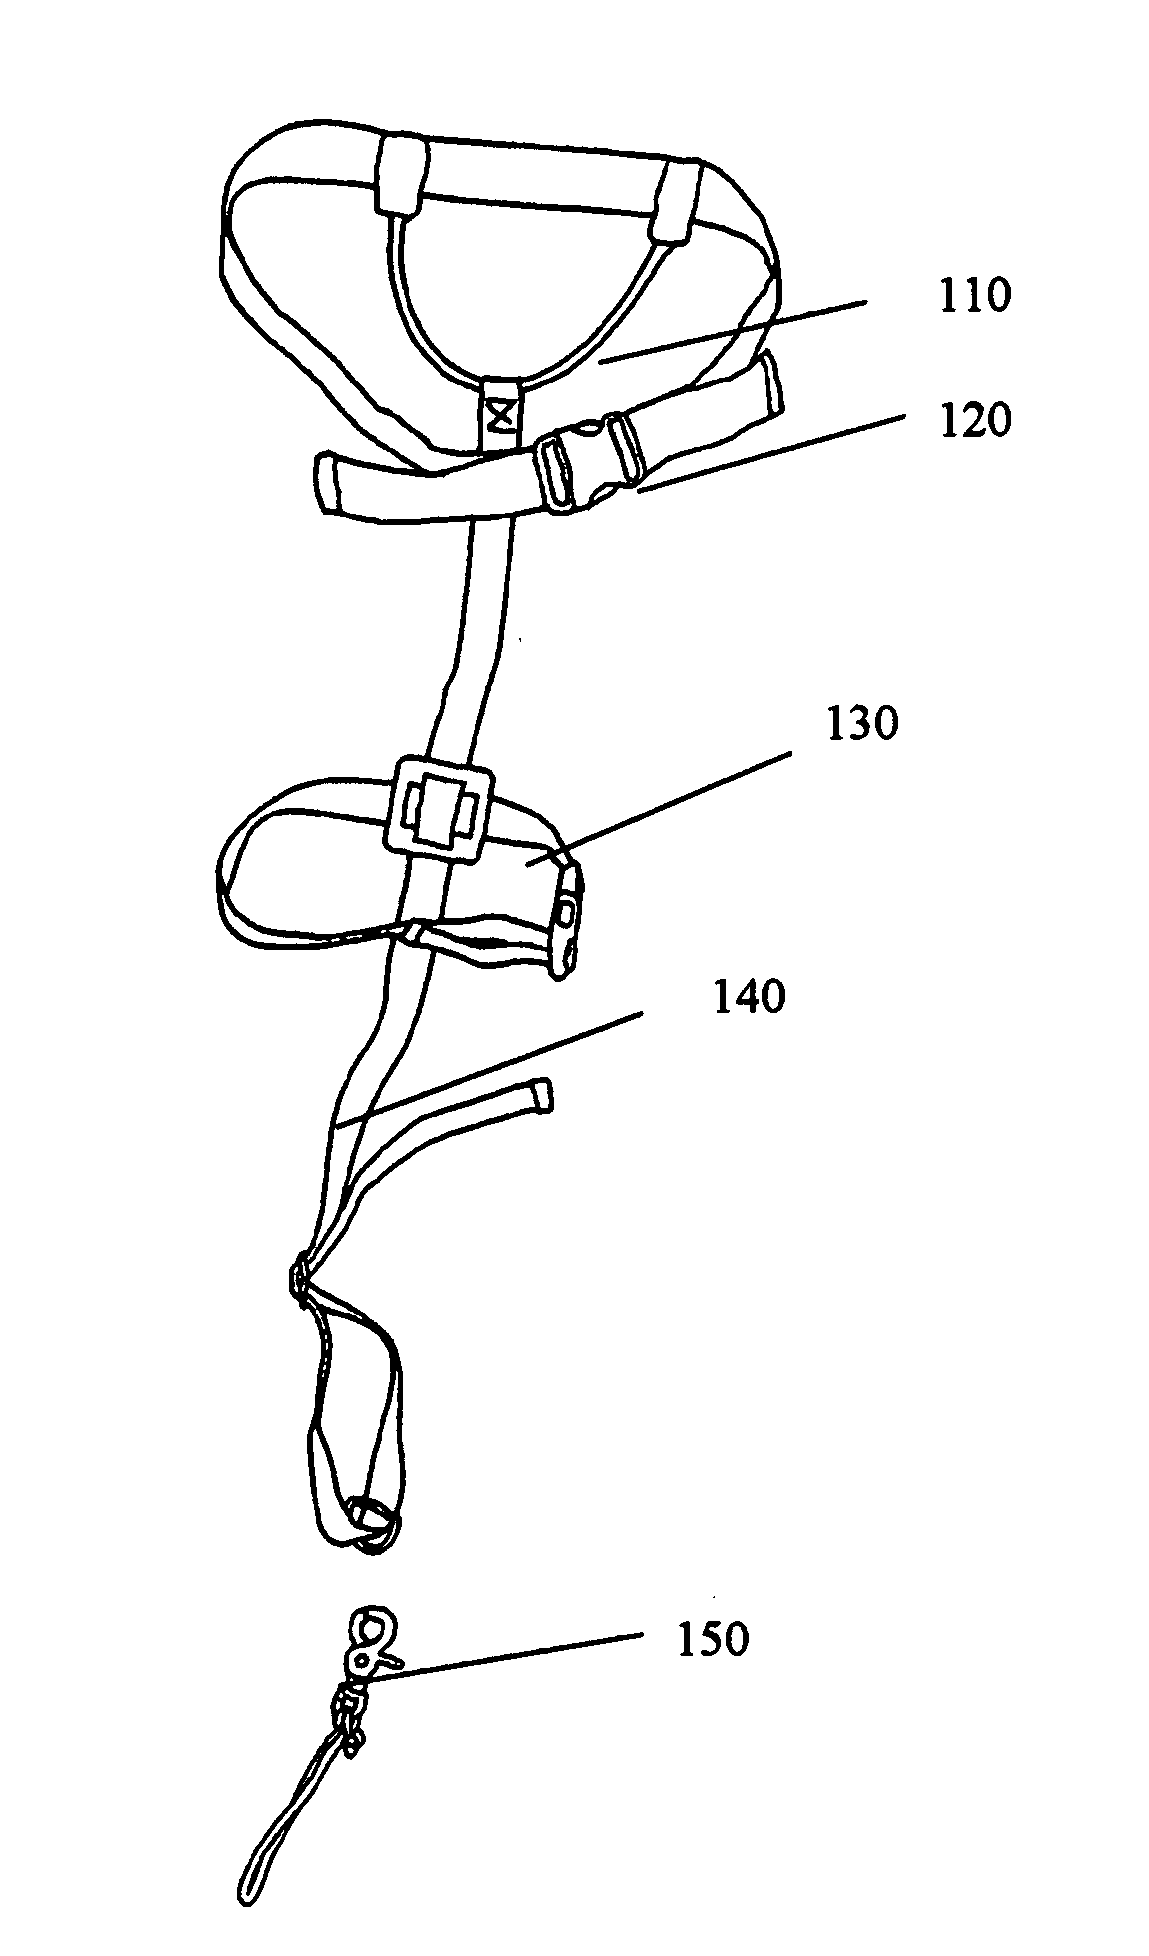 Device for supporting a snowboard during use